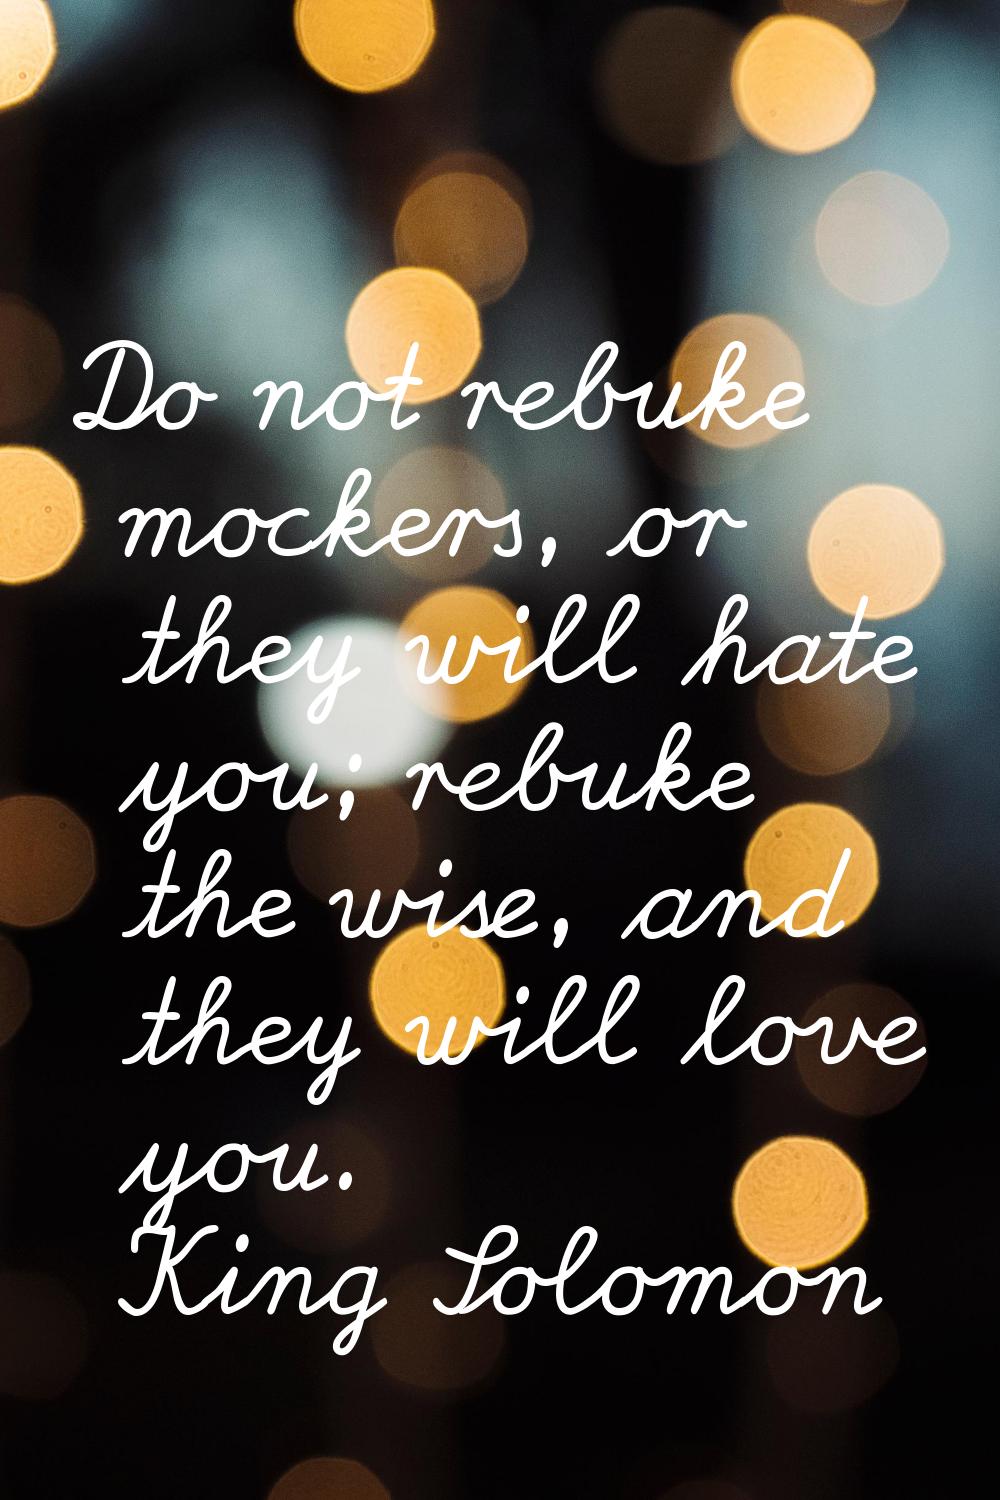 Do not rebuke mockers, or they will hate you; rebuke the wise, and they will love you.